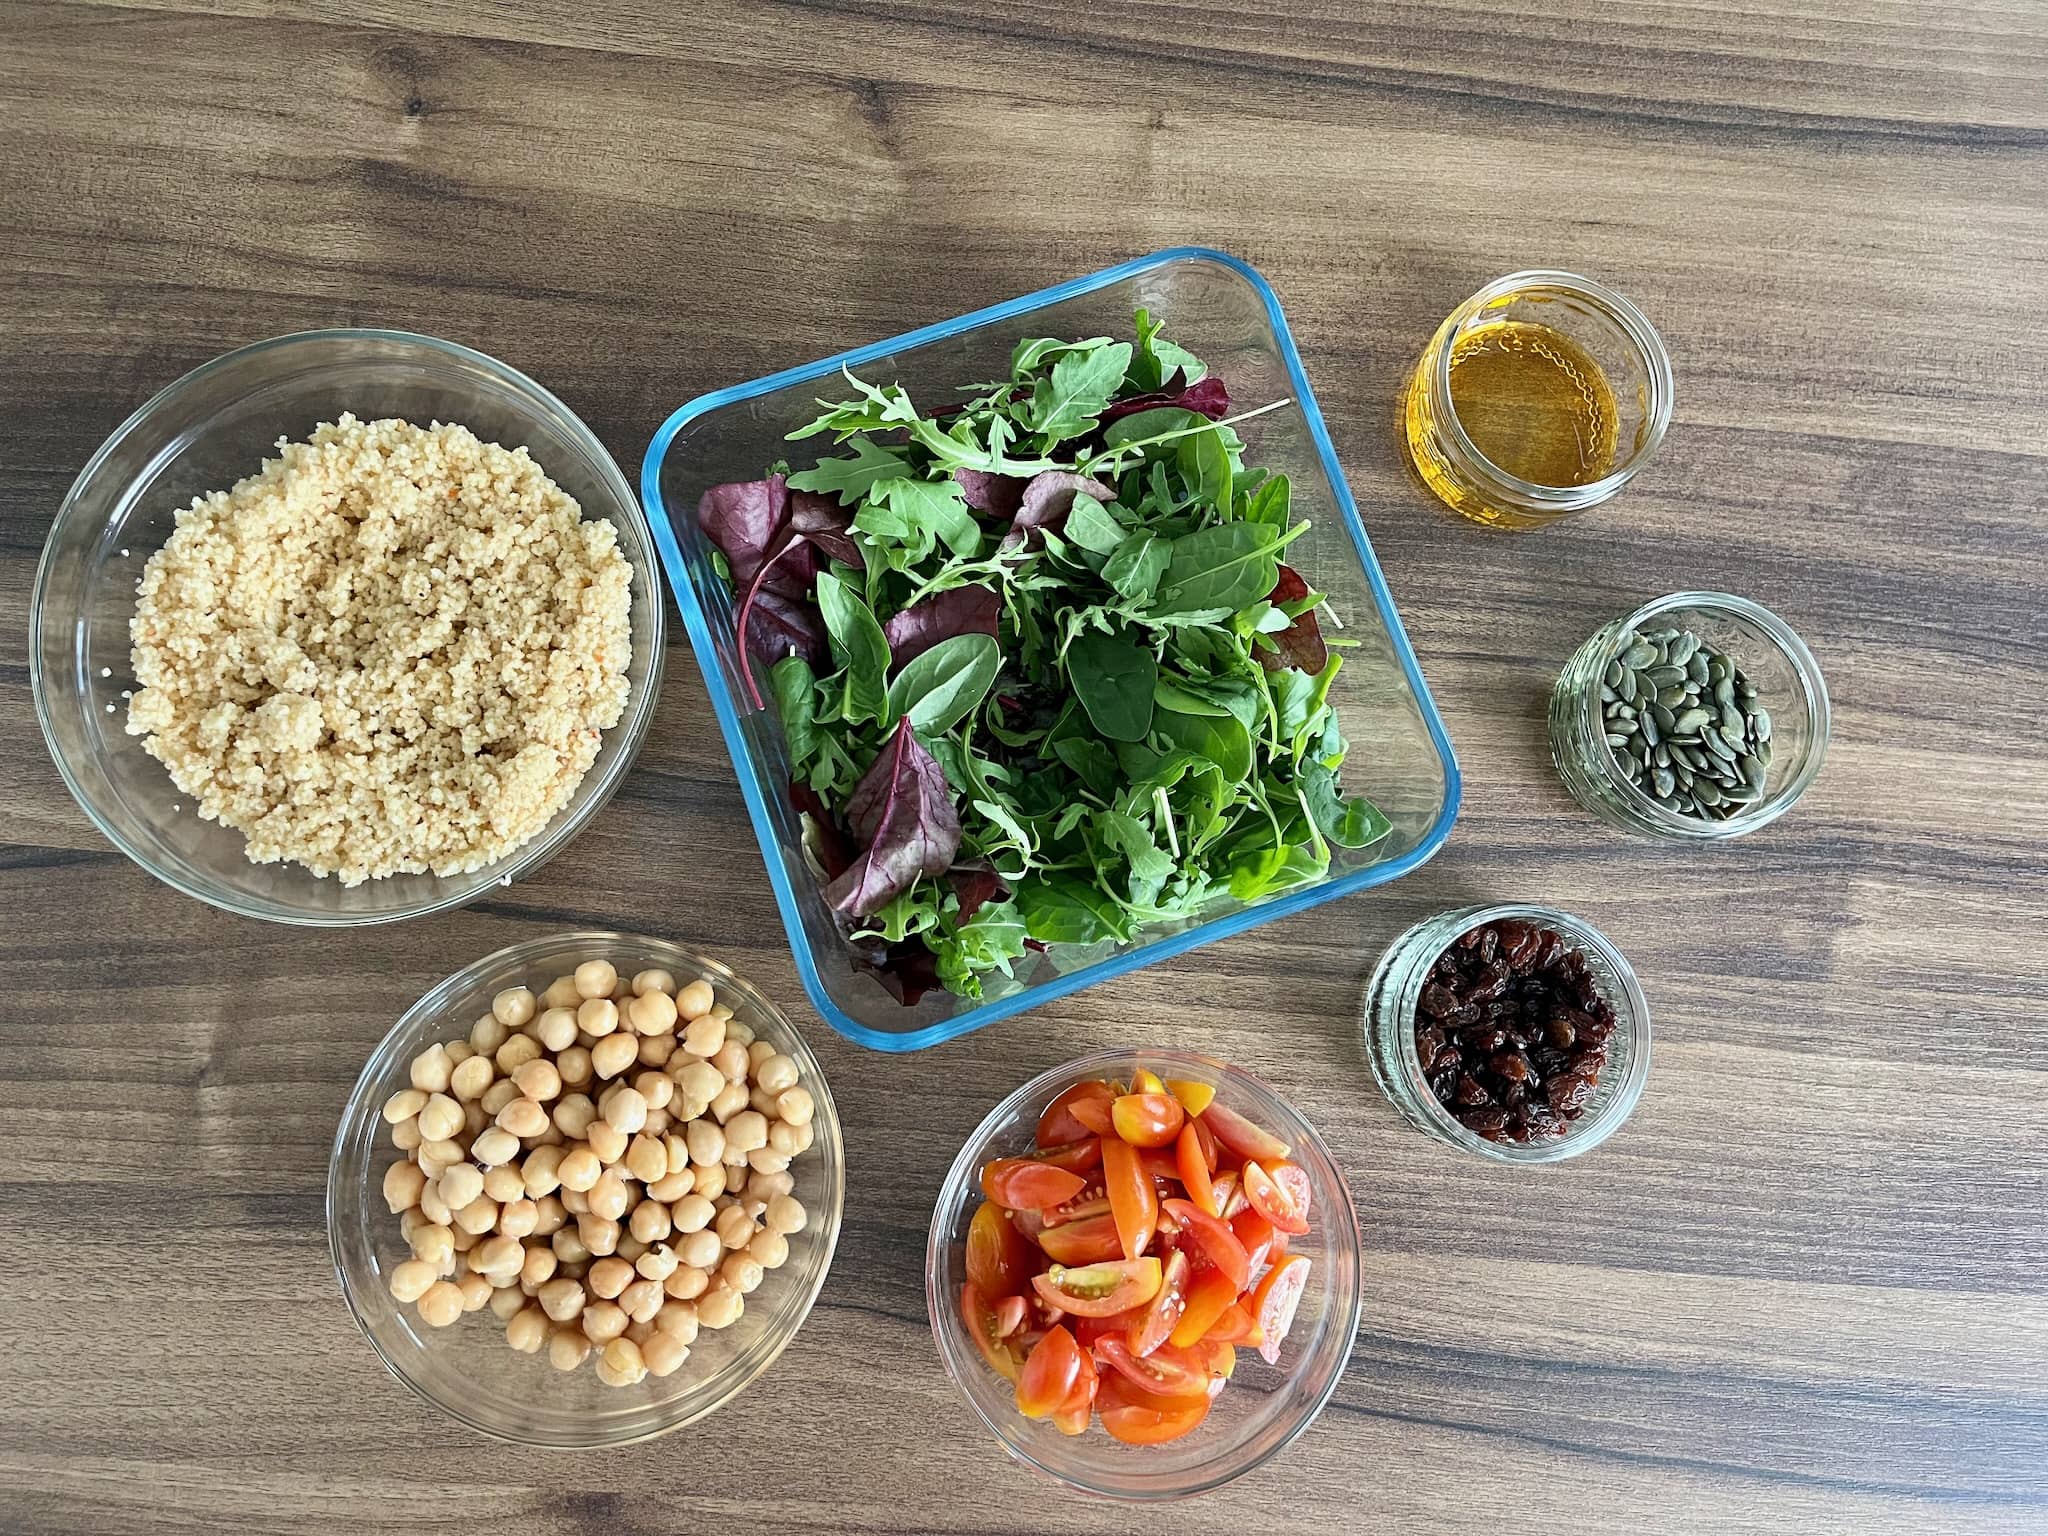 All ingredients for a Couscous &amp; Chickpeas Salad